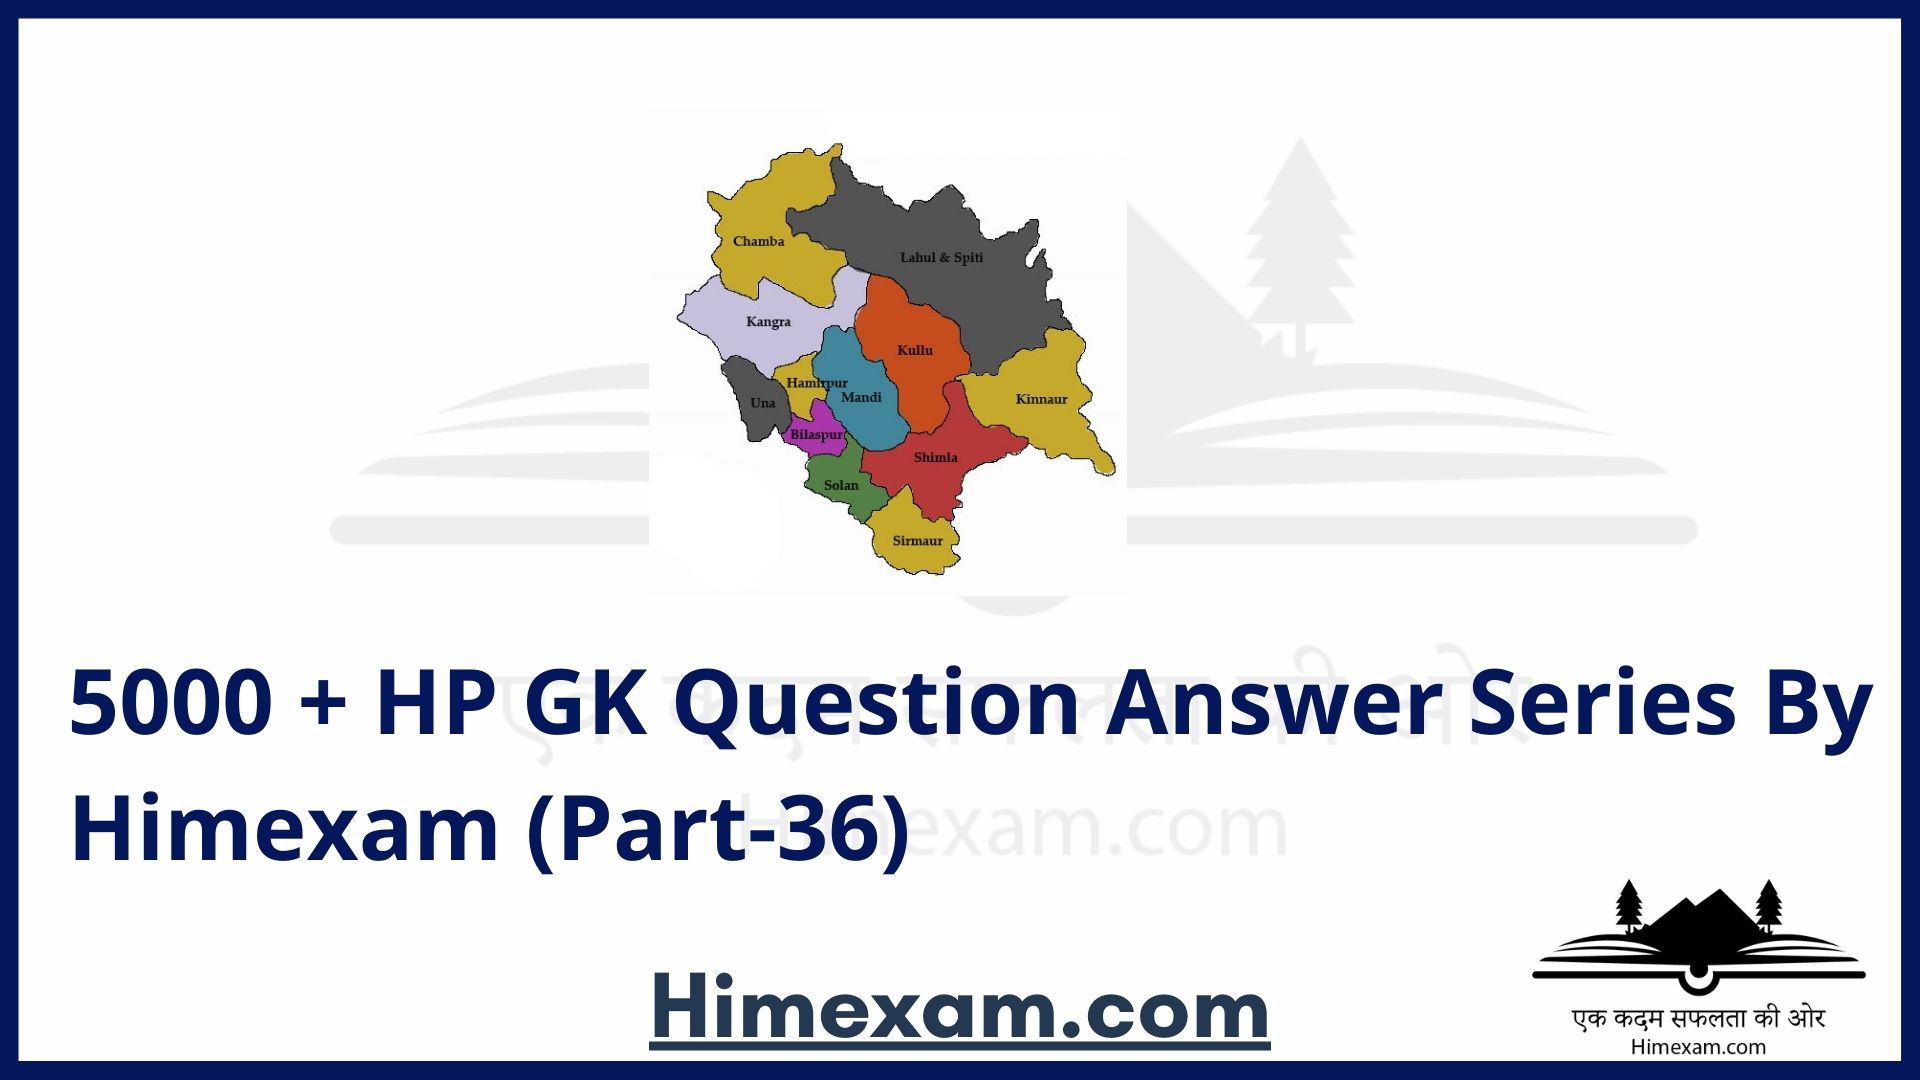 5000 + HP GK Question Answer Series By Himexam (Part-36)